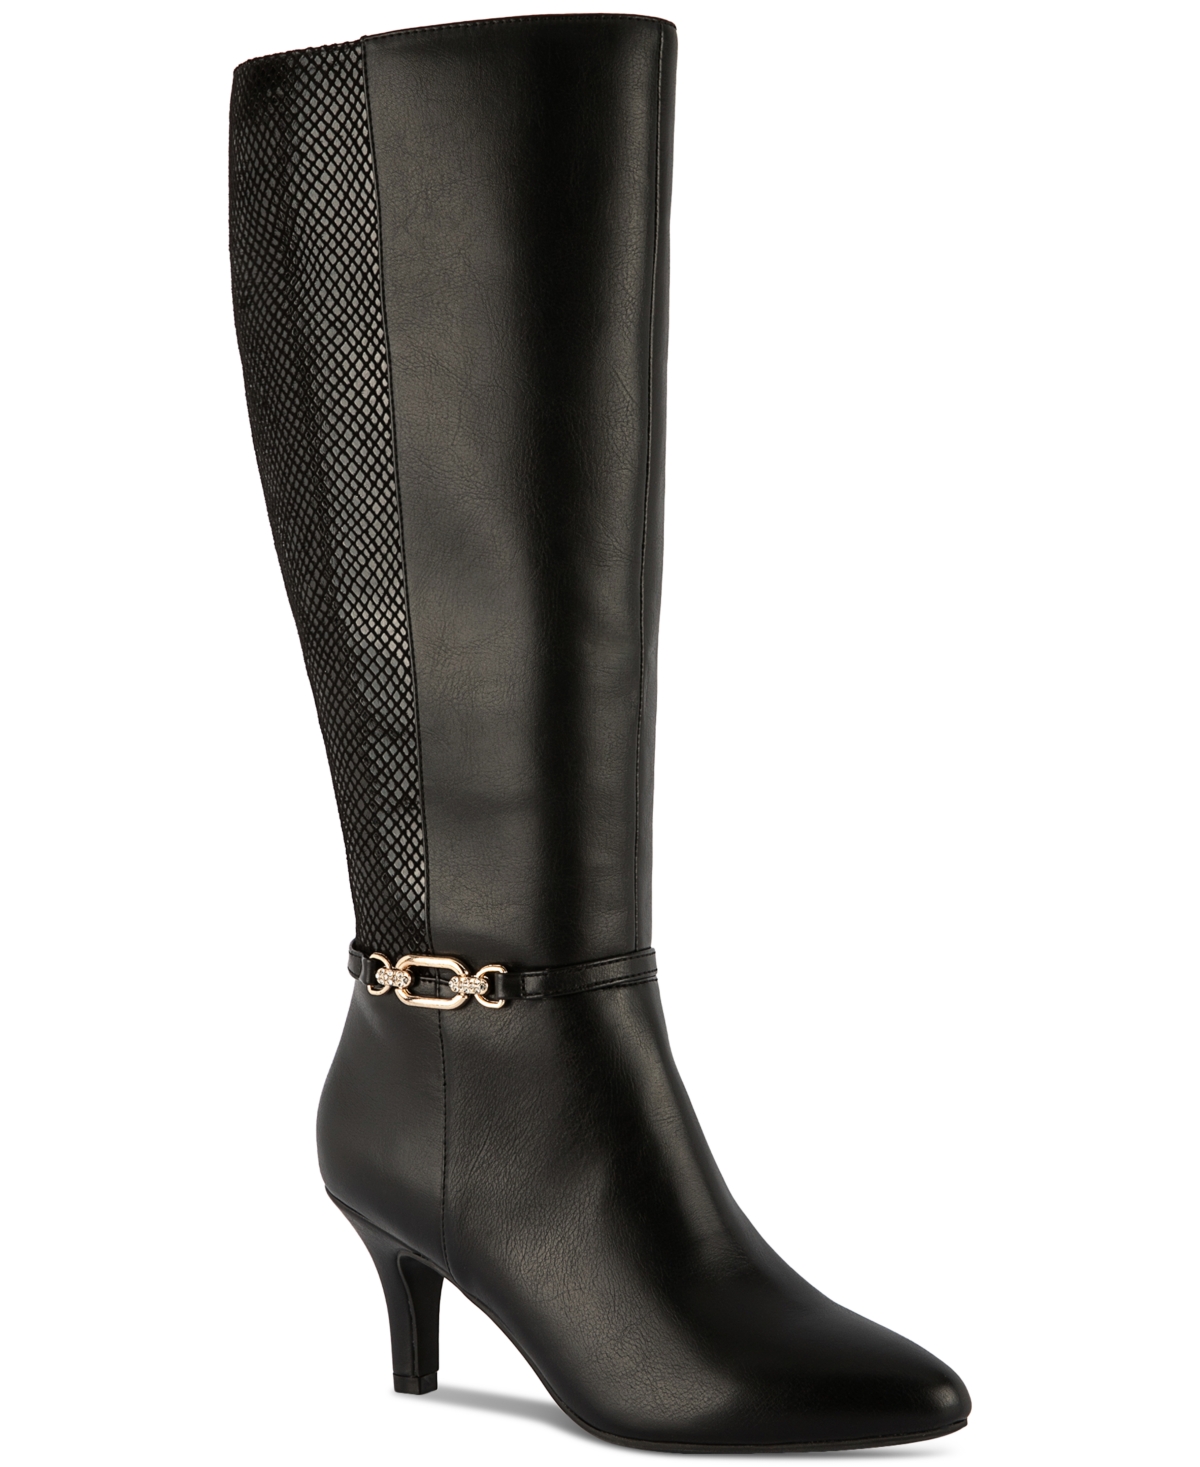 Freylyn Buckled Dress Boots, Created for Macy's - Black Smooth Snake